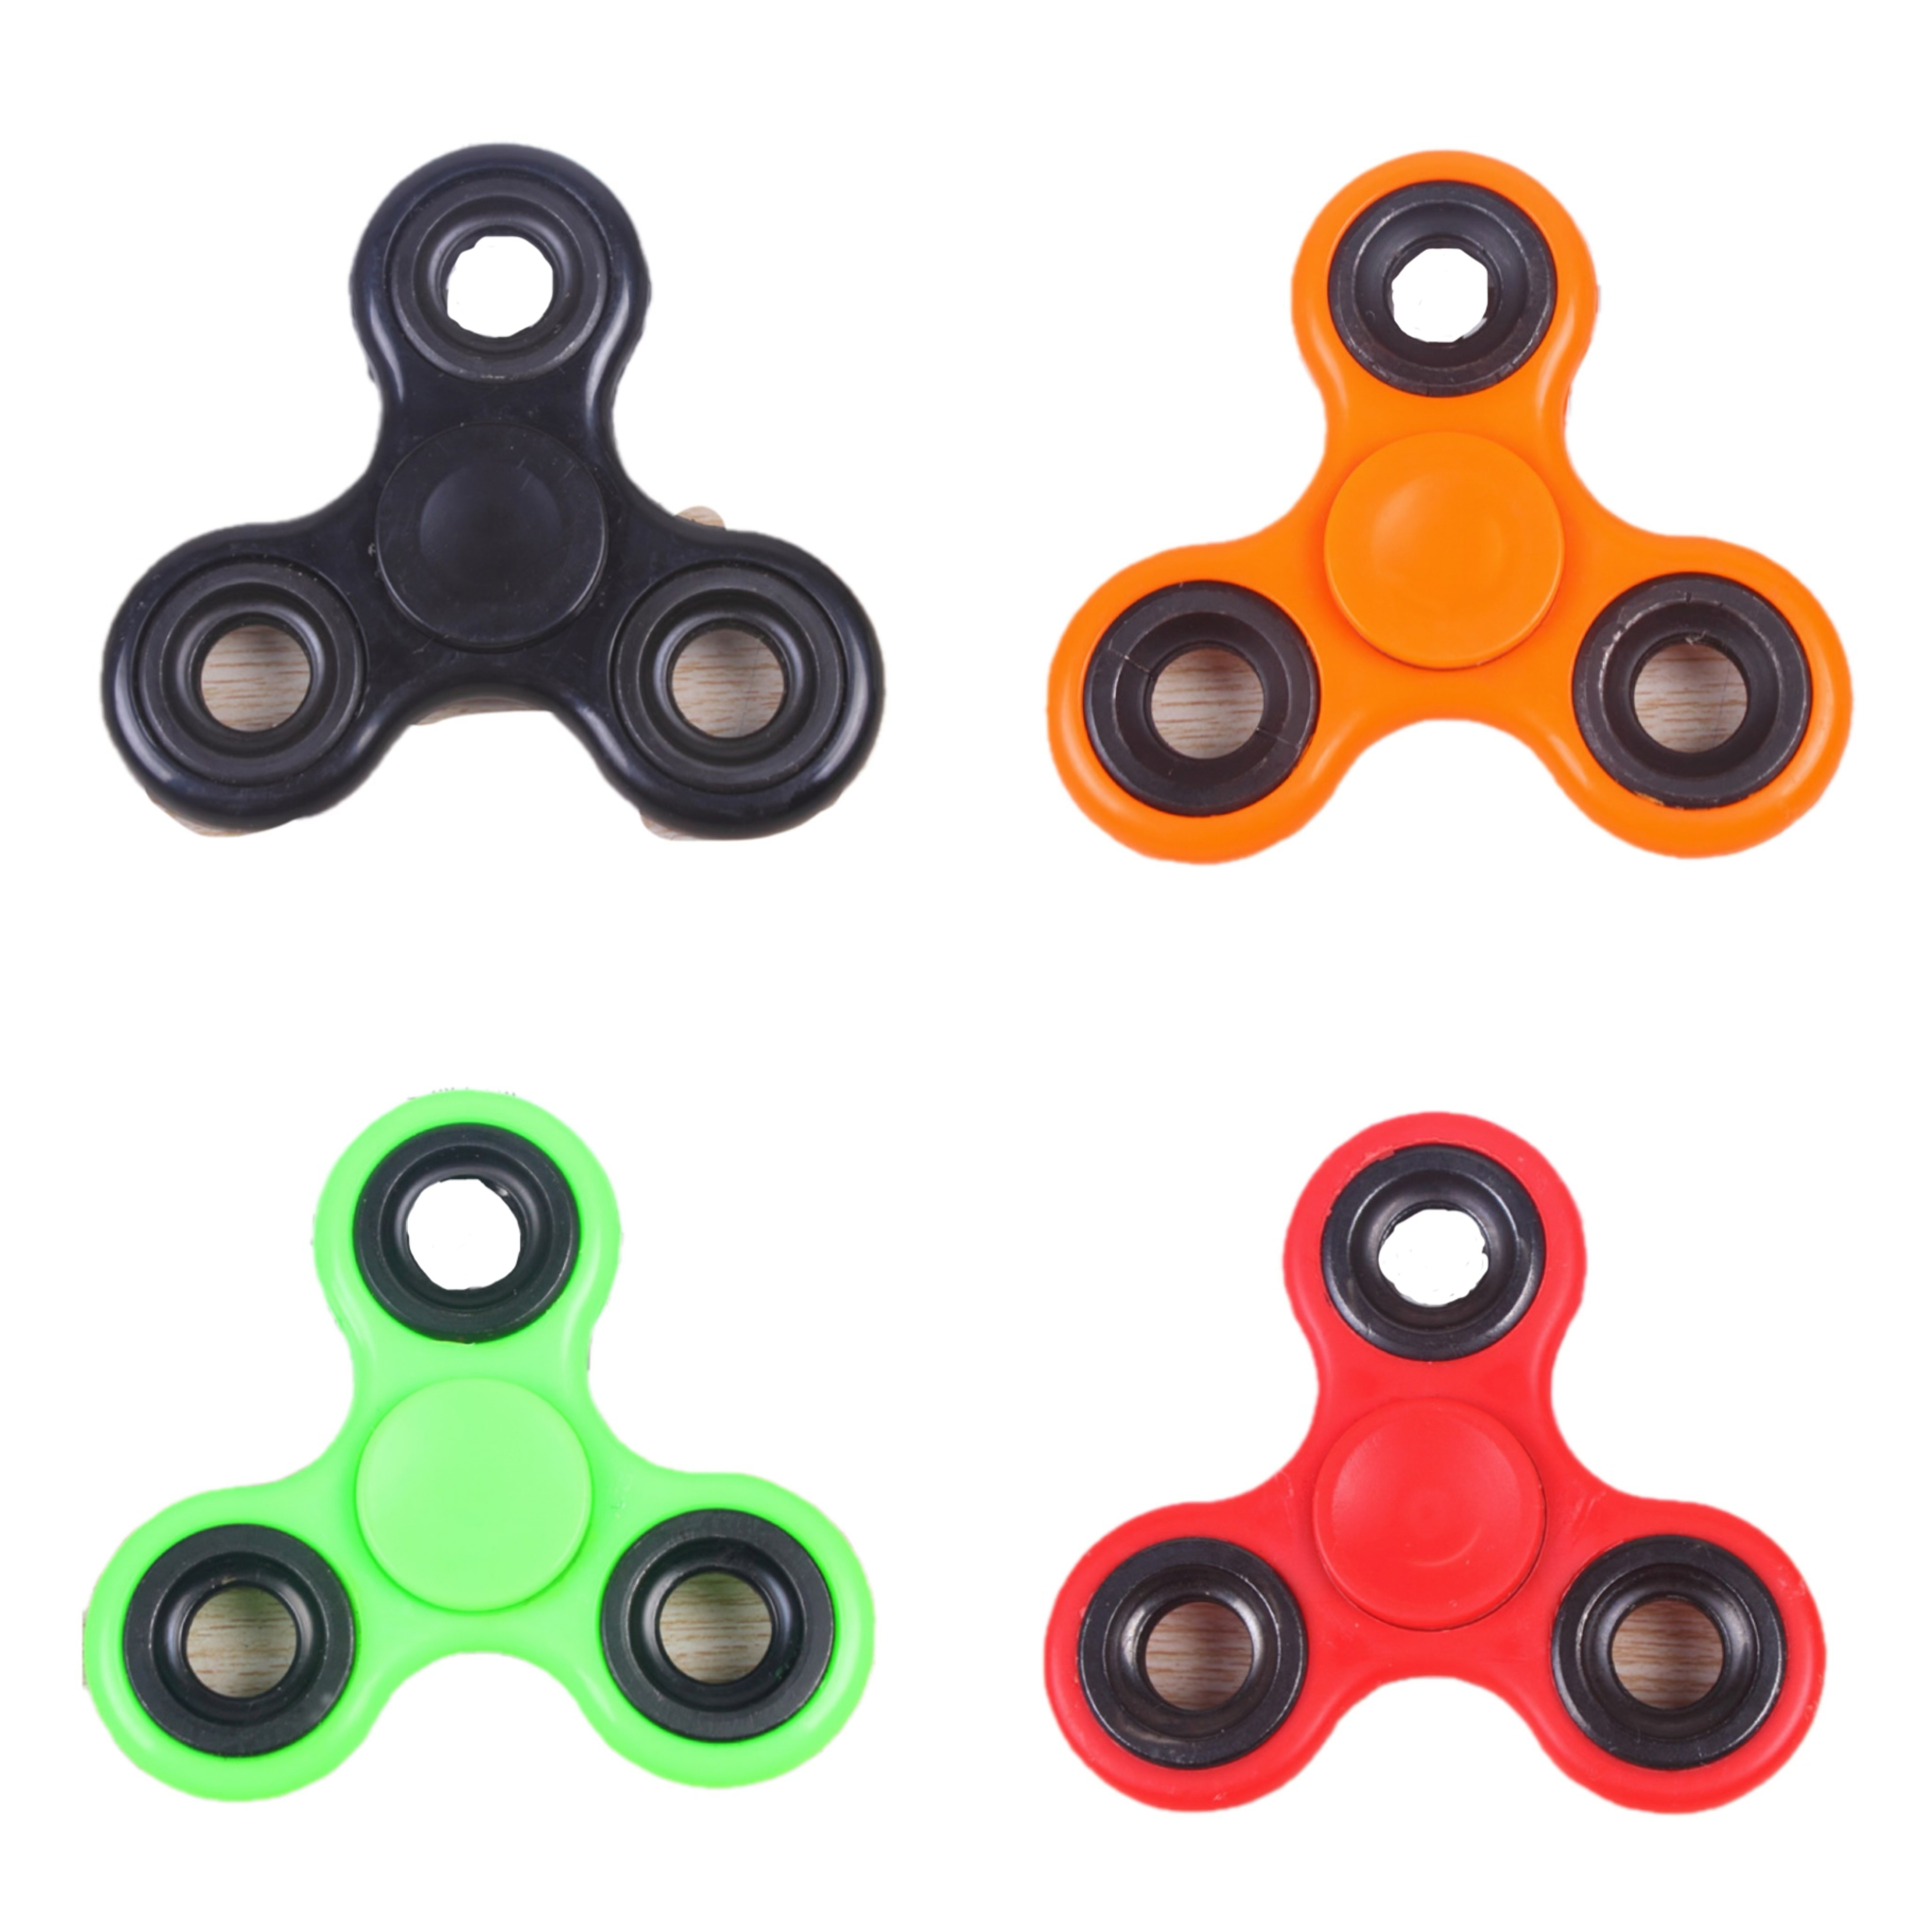 Fidget Spinner Cool Design Fidget Toy Creative Transformable Fingertip Gyro  Spinner Mech Chain Bearing Funy Decompression Anti-anxiety (red)